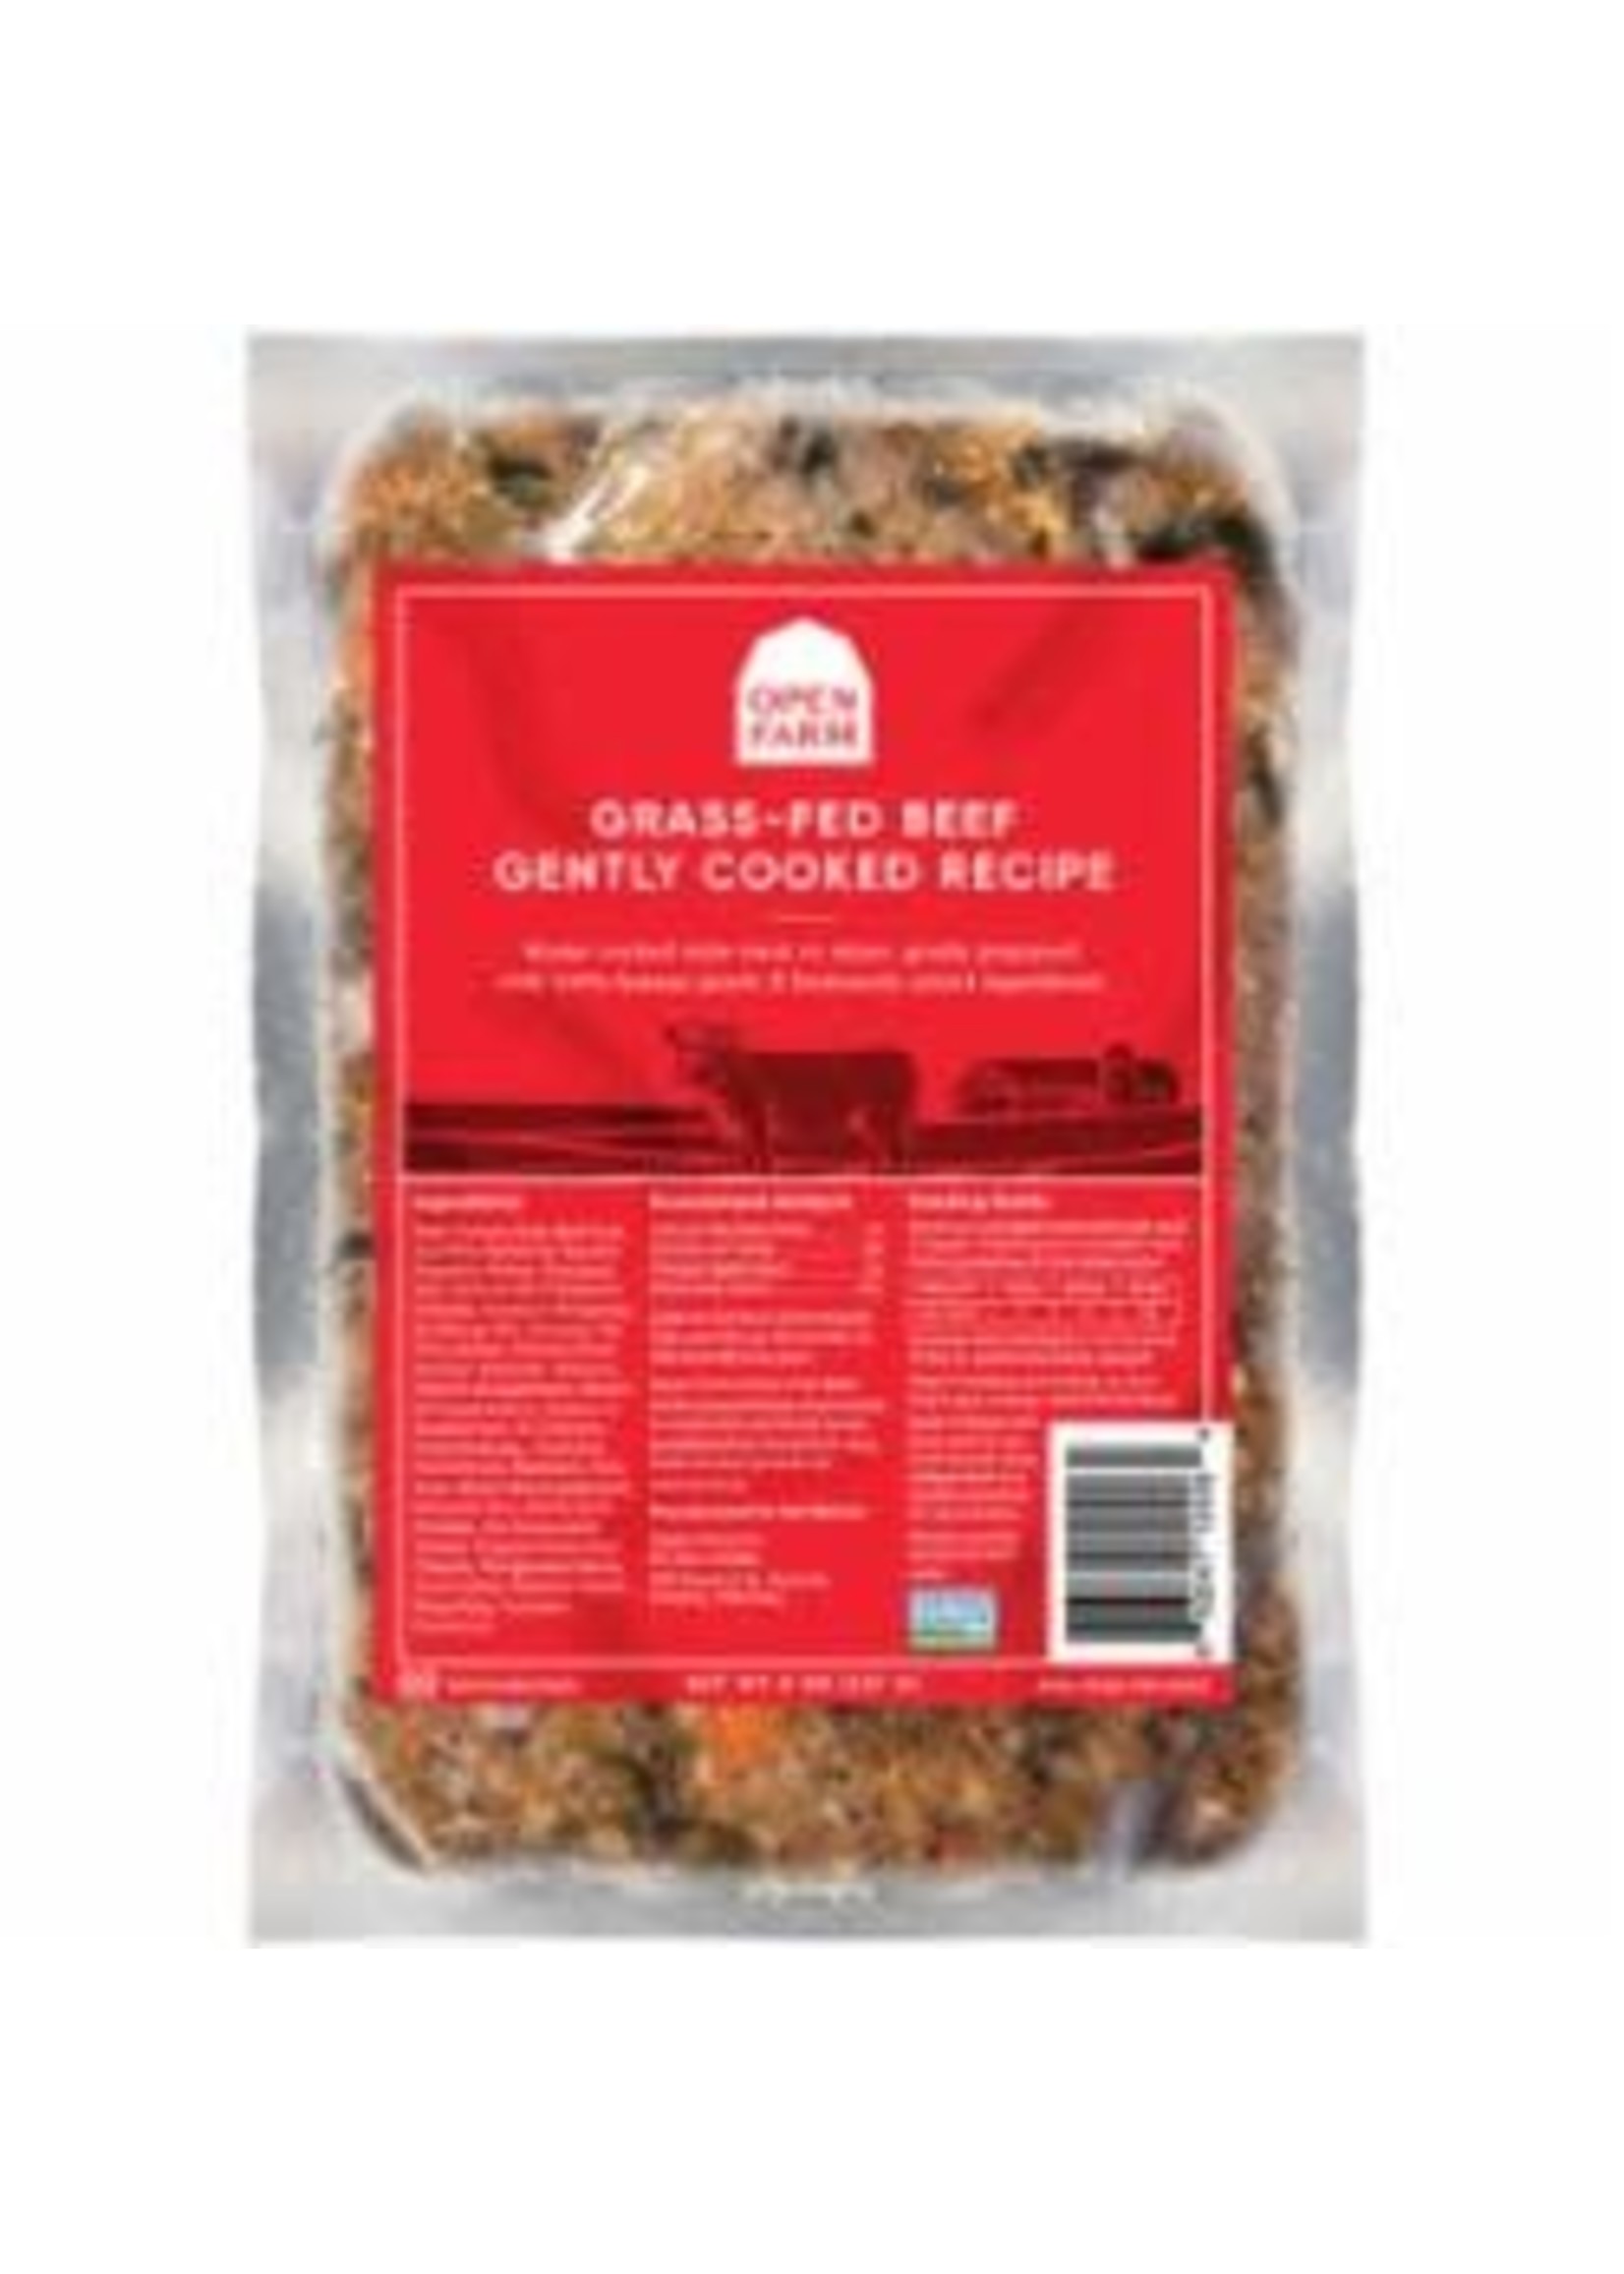 Open Farm Grass-Fed Beef Gently-Cooked Recipe 8oz